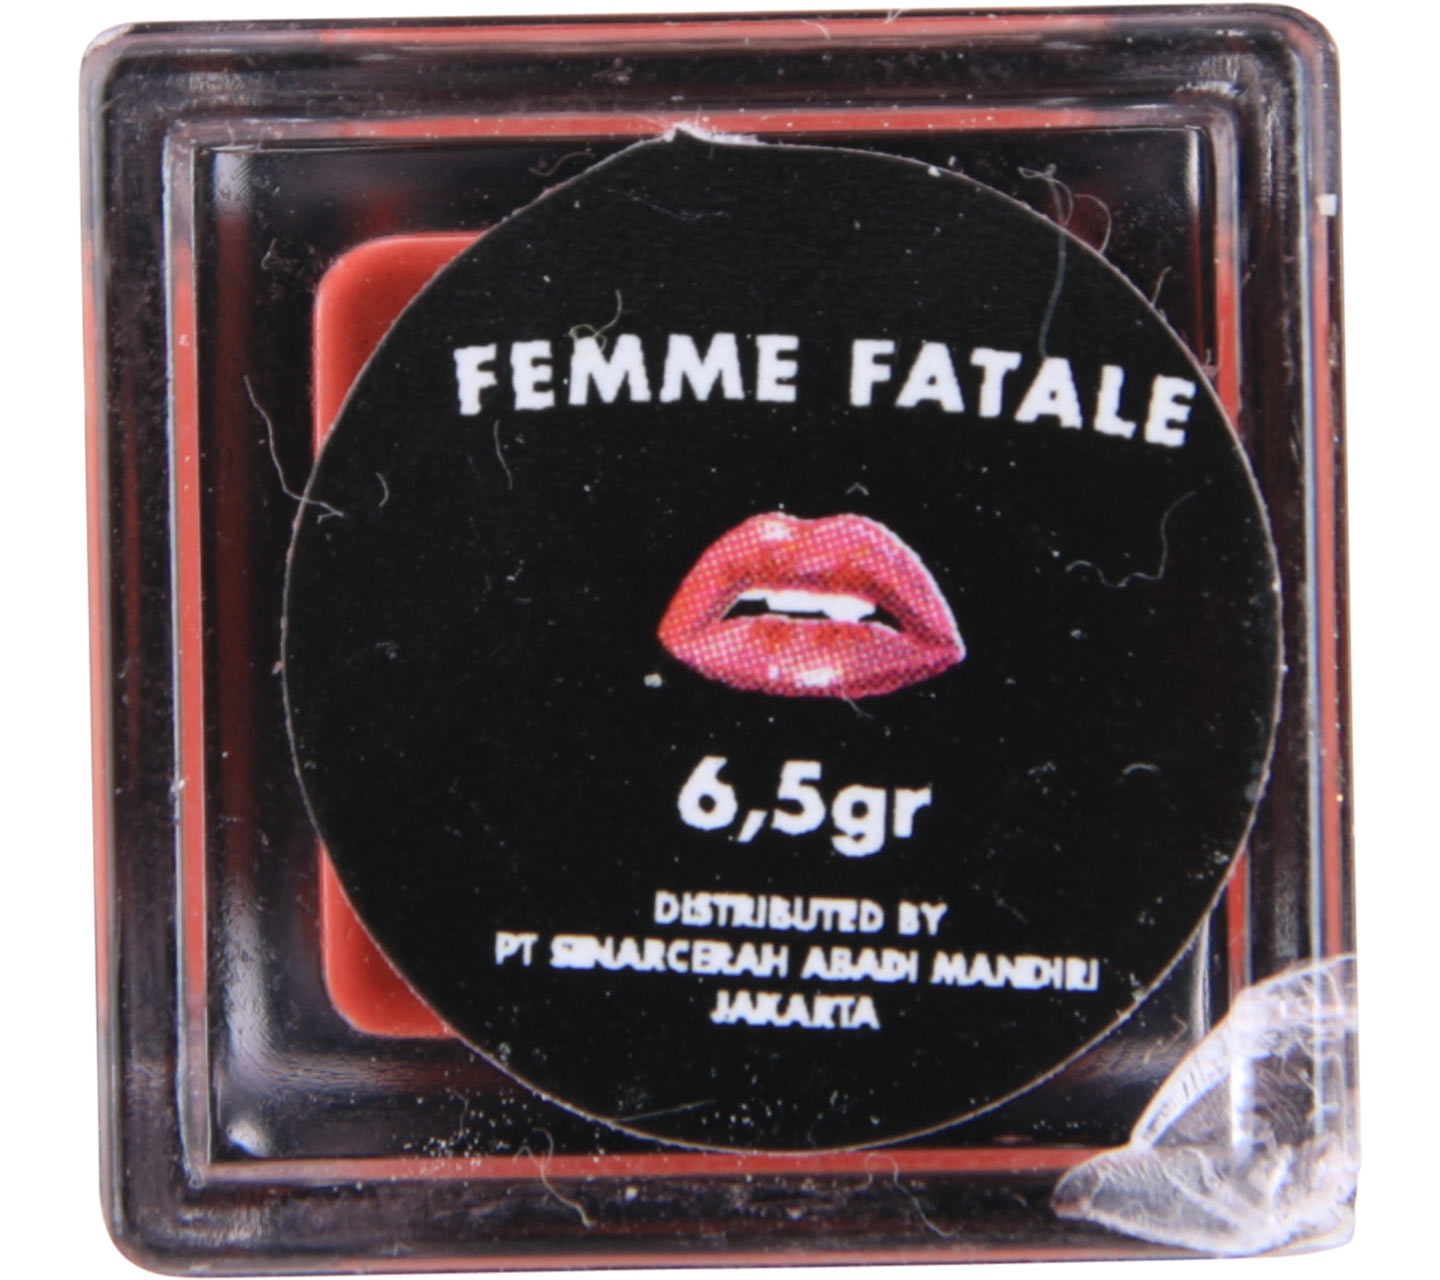 MAD For Lipstick Femme Fatale Lips